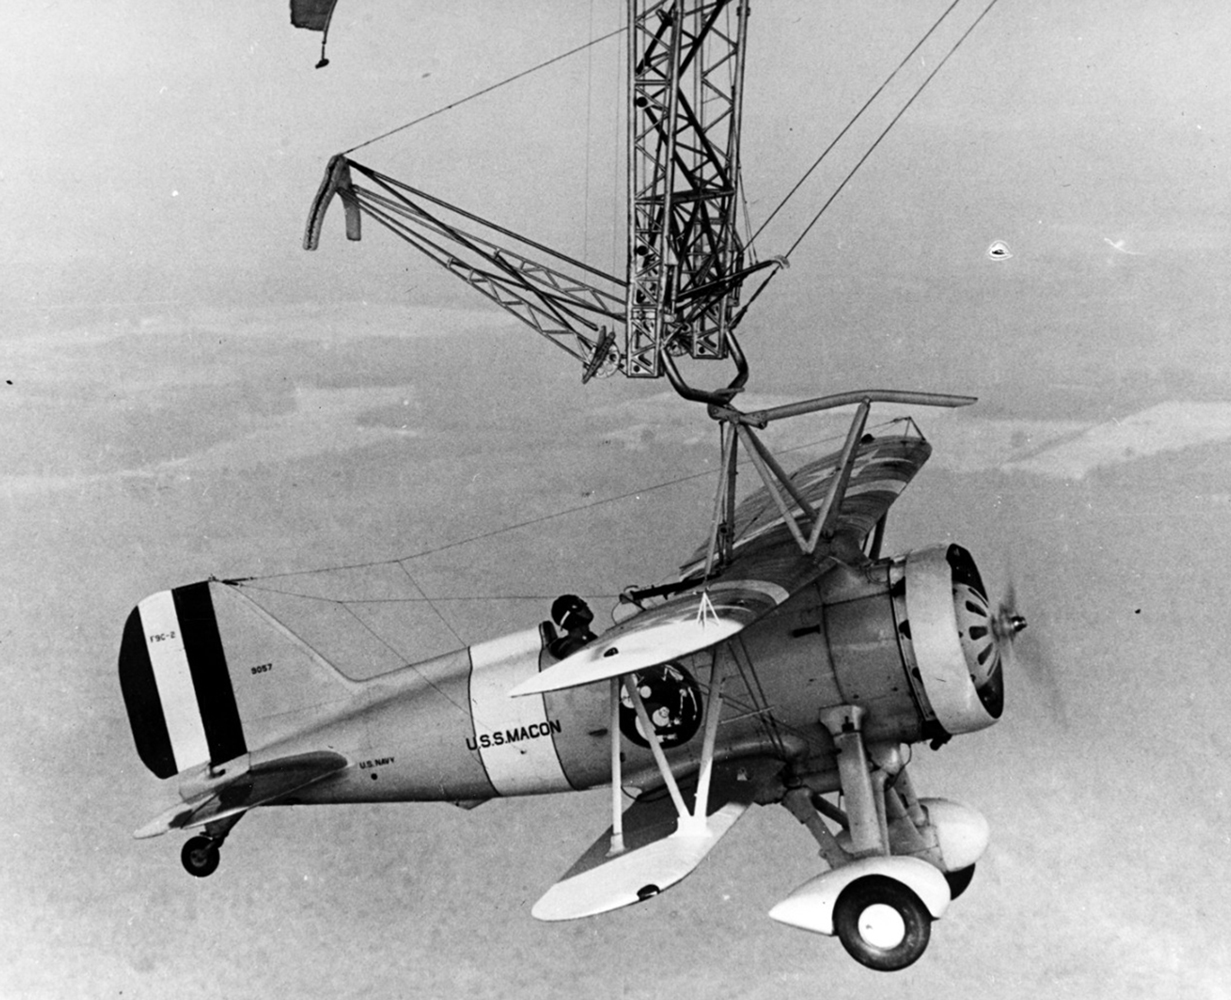 A single propeller biplane, with a pilot in the cockpit, hangs high in the air from the trapeze hook attached to the bottom of the USS Macon dirigible.